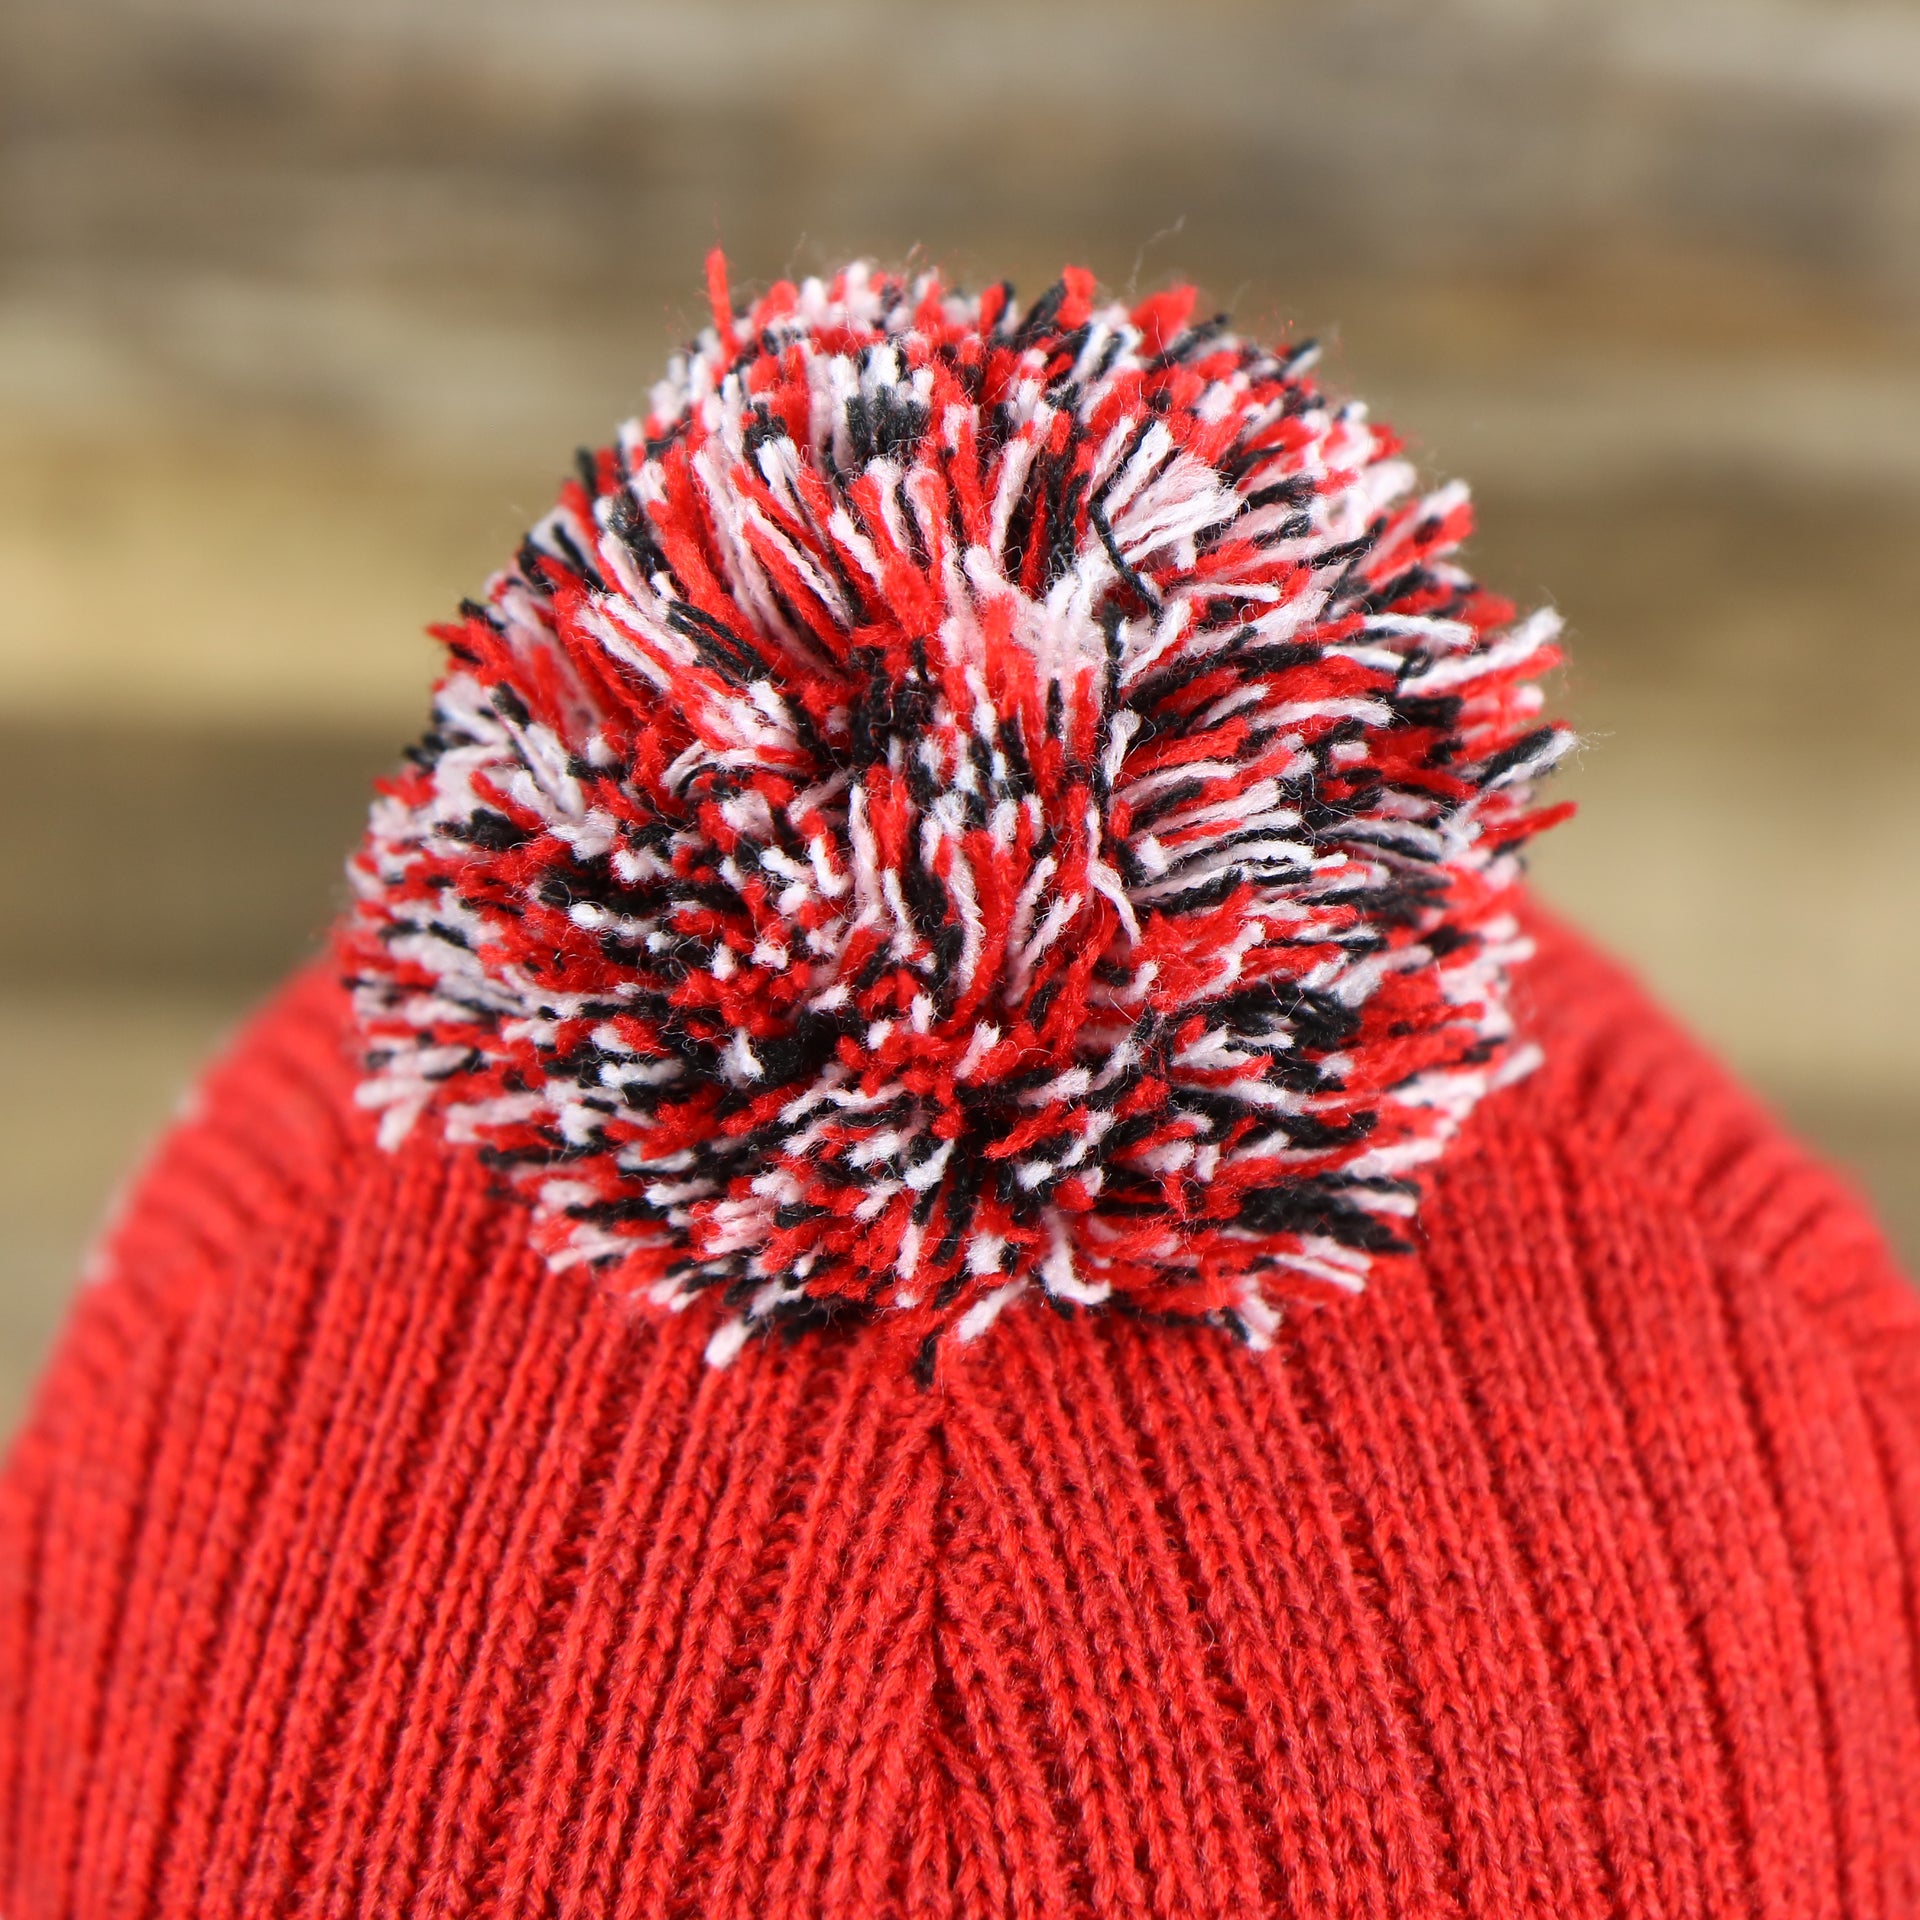 The Multi Colored Pom Pom on the New Jersey Devils Cuffed Logo Striped Winter Beanie With Pom Pom | Red and Gray Winter Beanie